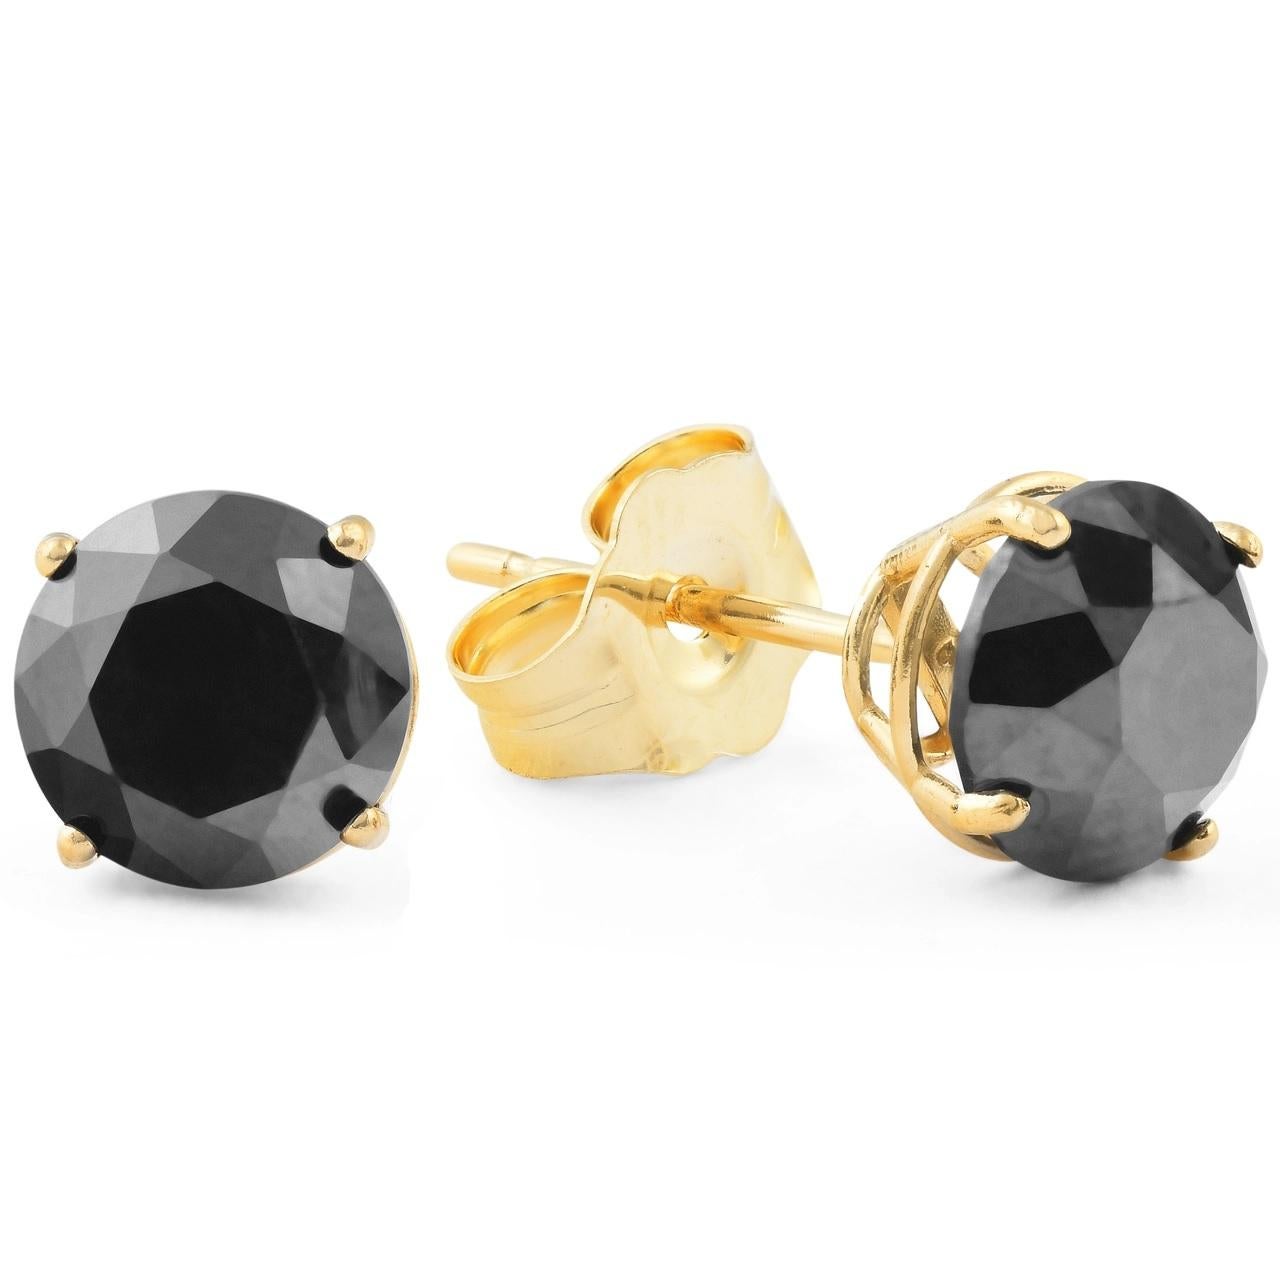 Make a daring statement with these spectacular diamond solitaire earrings. Crafted in 14K yellow gold, each earring showcases an alluring 4.3 mm mm natural round black diamond of in a four-prong setting. Impressive with 0.8 carat total weight of